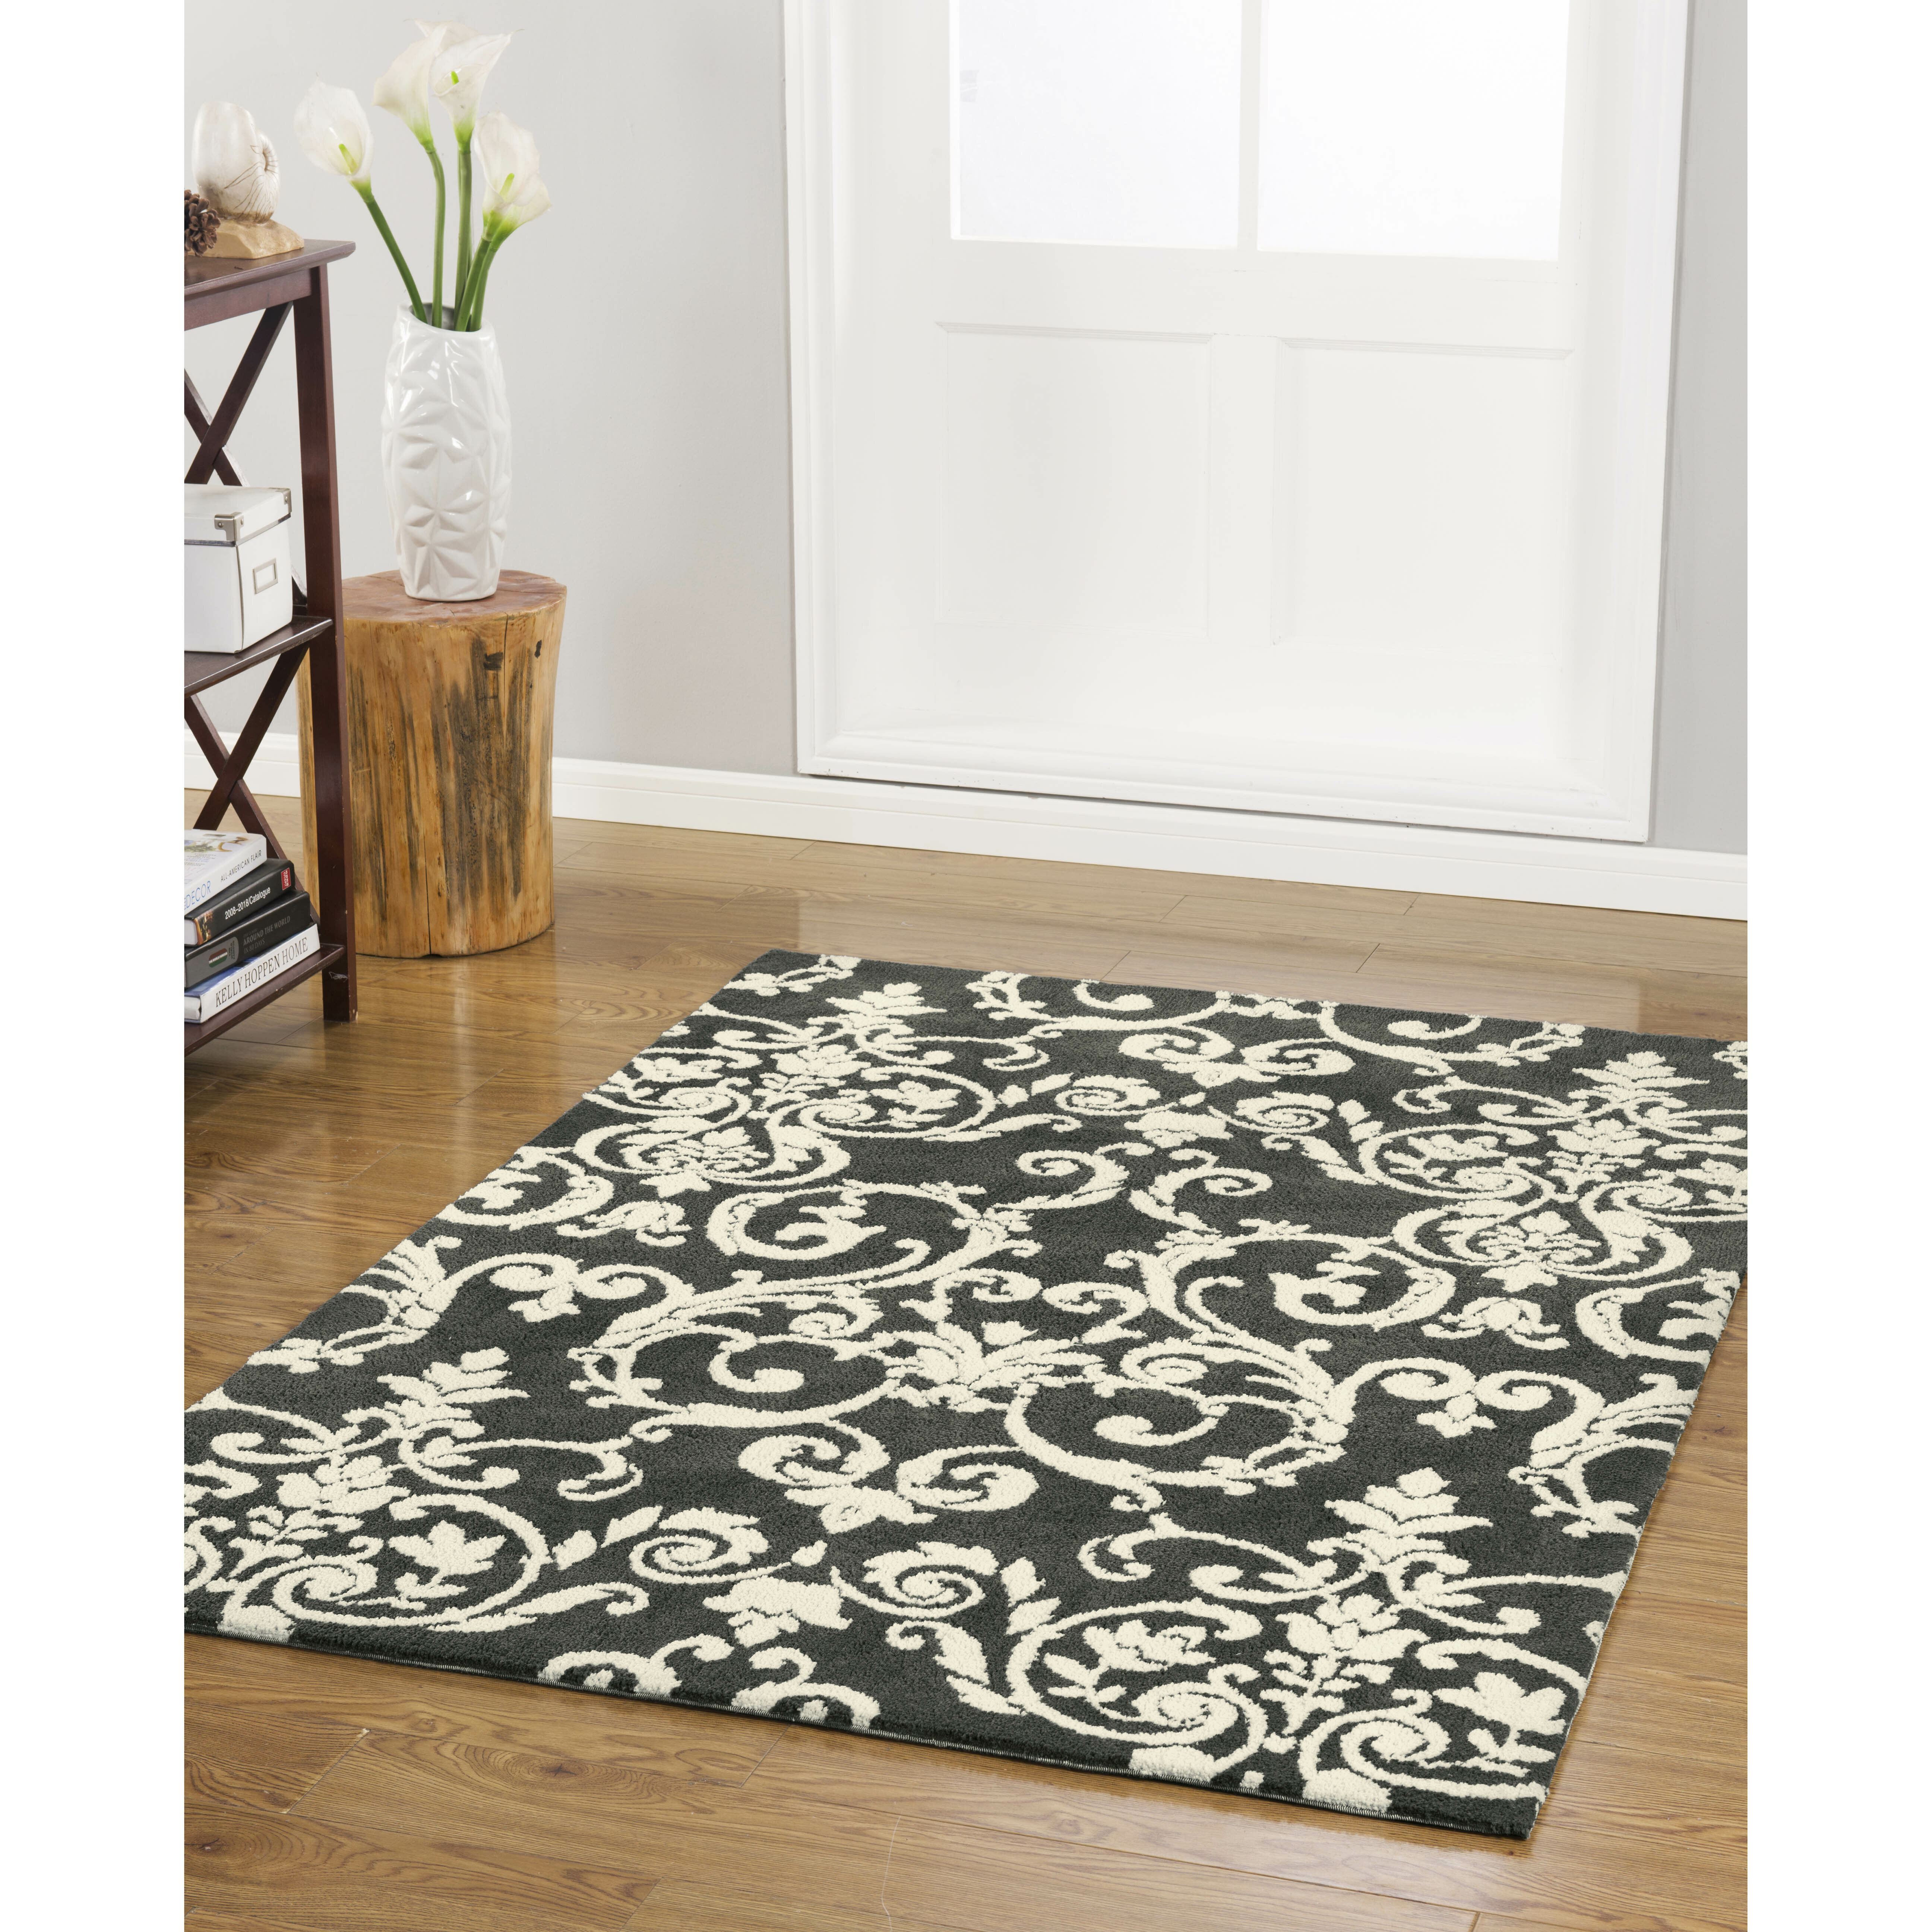 Featured image of post Laura Ashley Area Rugs 8X10 Sign up for uo rewards and get 10 off your next purchase